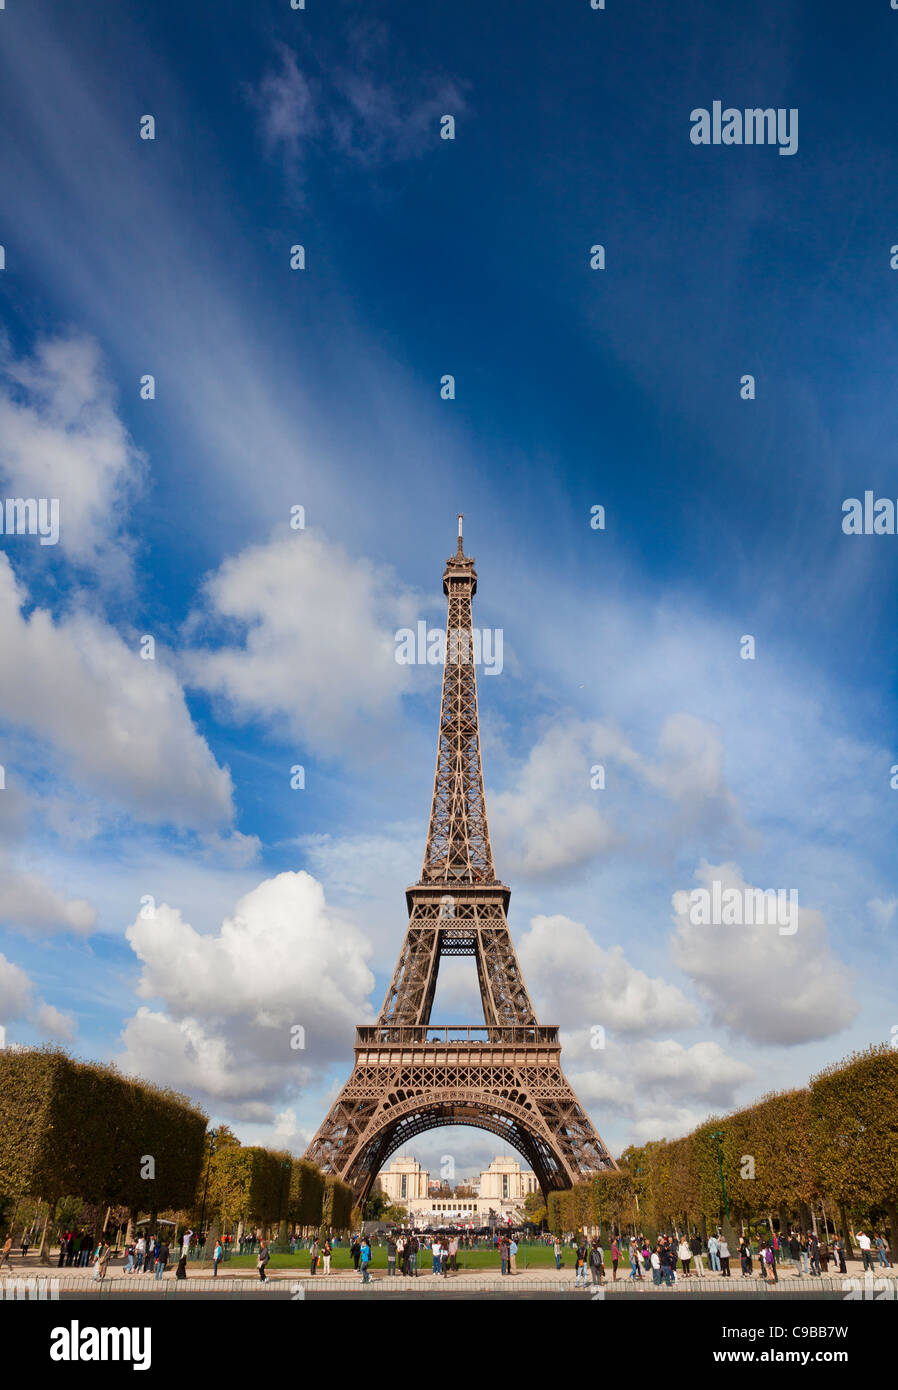 The Eiffel tower, viewed from the South, Paris, France. Bright sunny day blue sky. Stock Photo